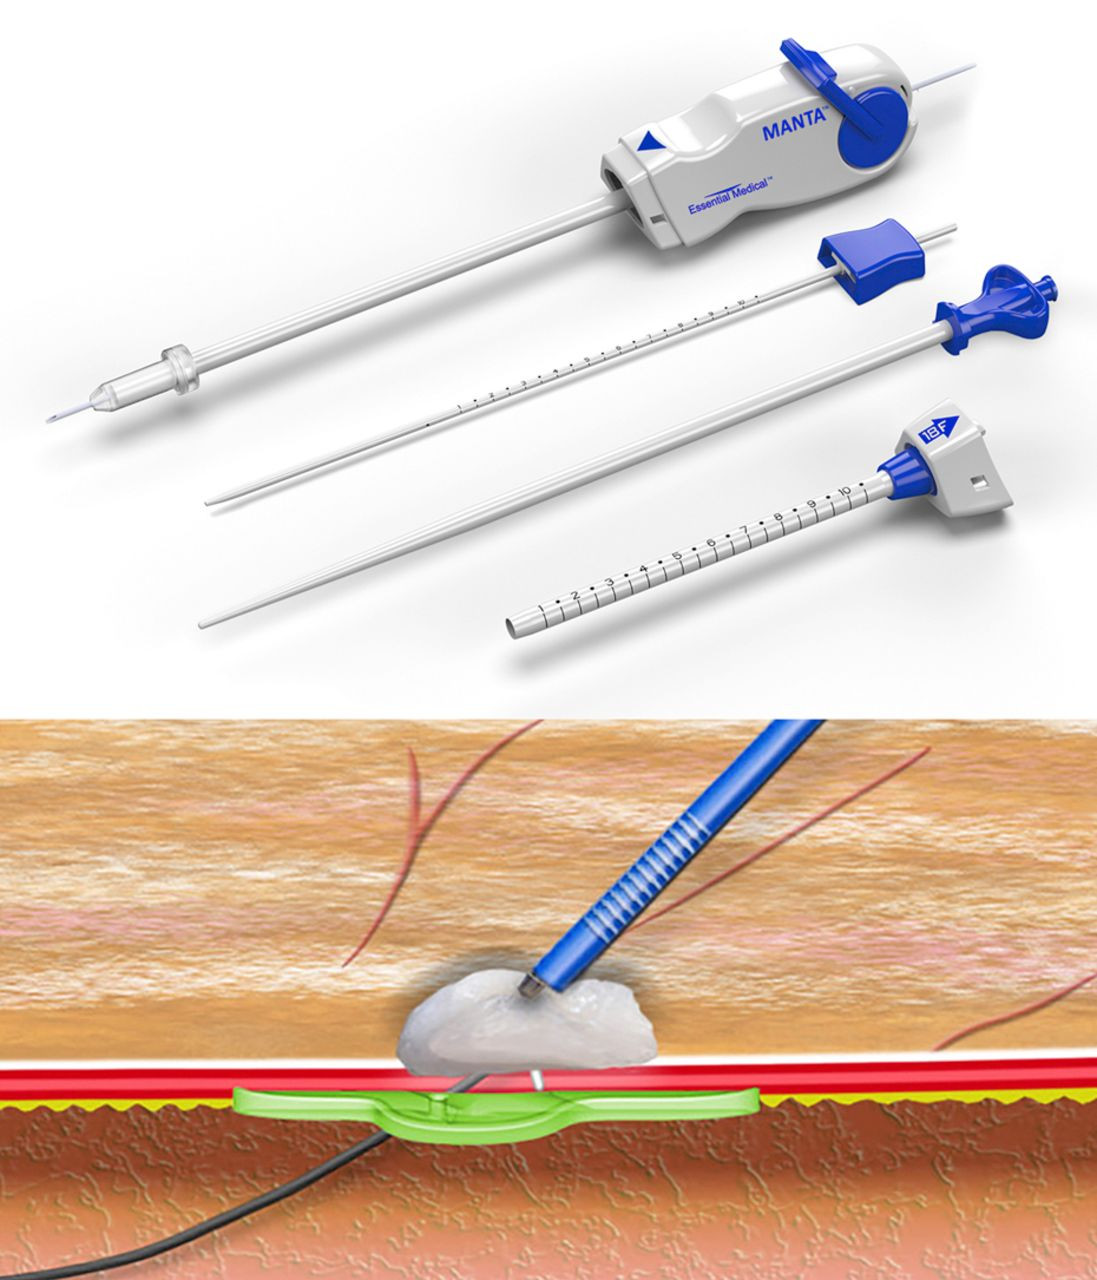 hardwood floor repair markers of percutaneous plug based arteriotomy closure device for large bore with regard to download figure